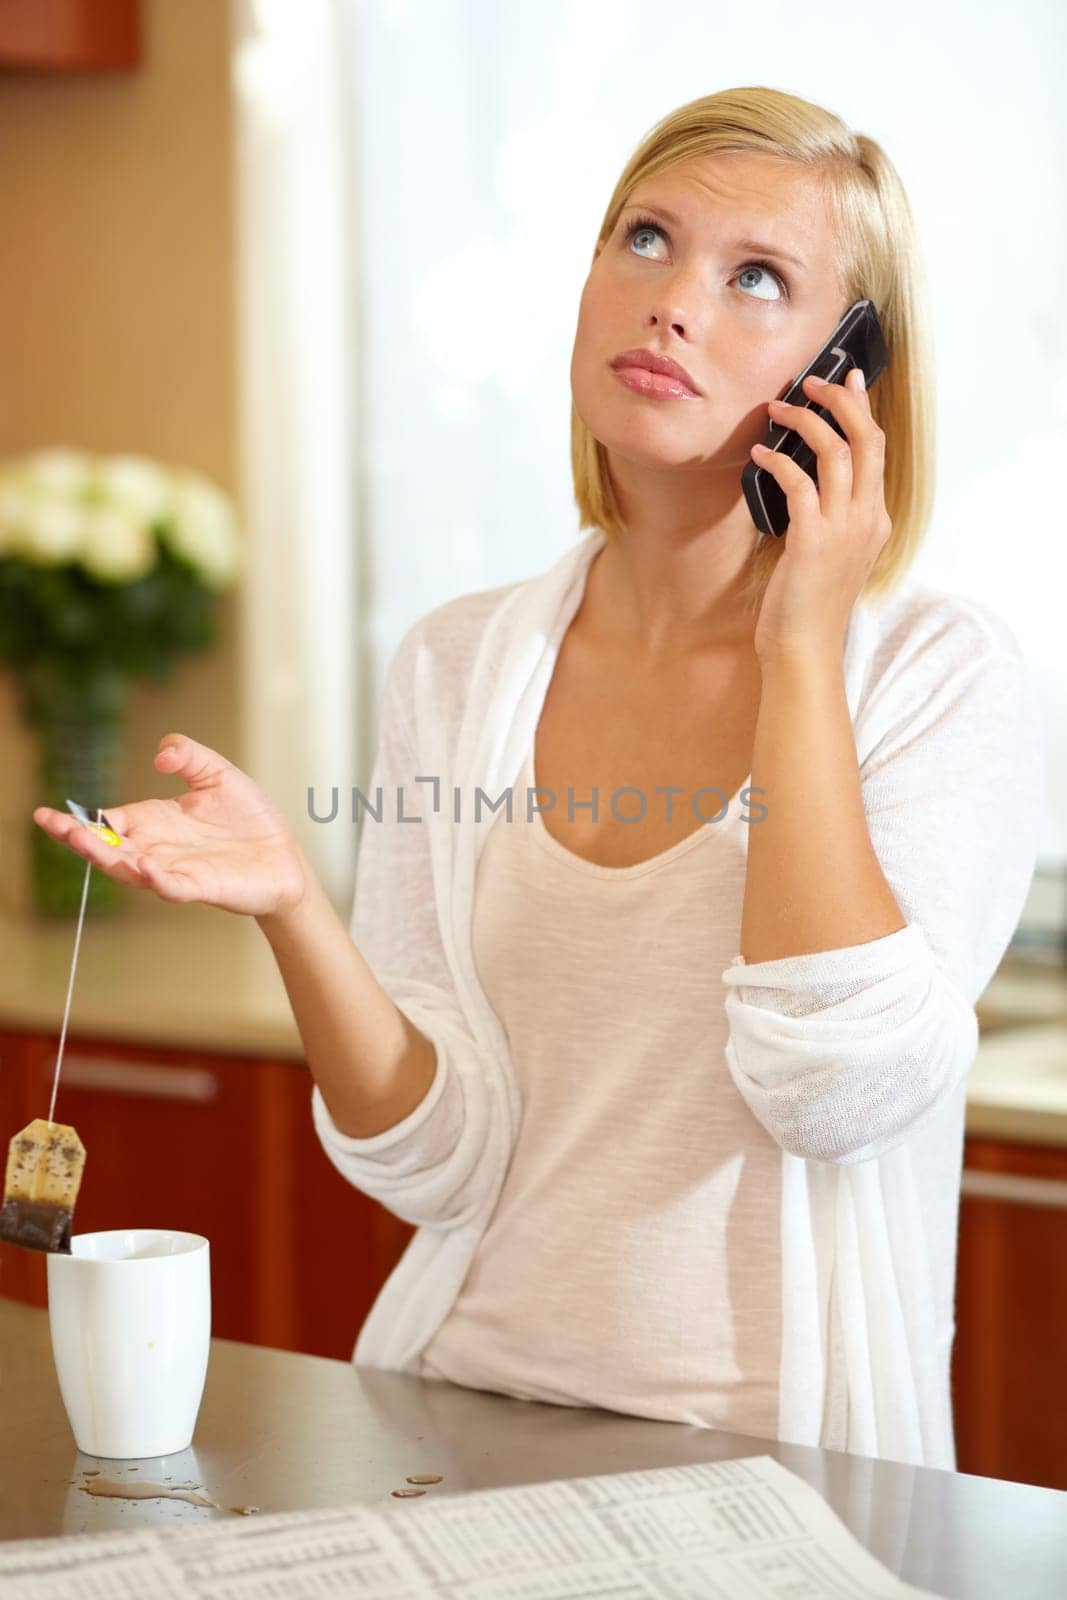 Woman, phone call and conversation in kitchen, news and communication on technology at home. Female person, smartphone and discussion or tea, connection and newspaper or newsletter, chat and talk.